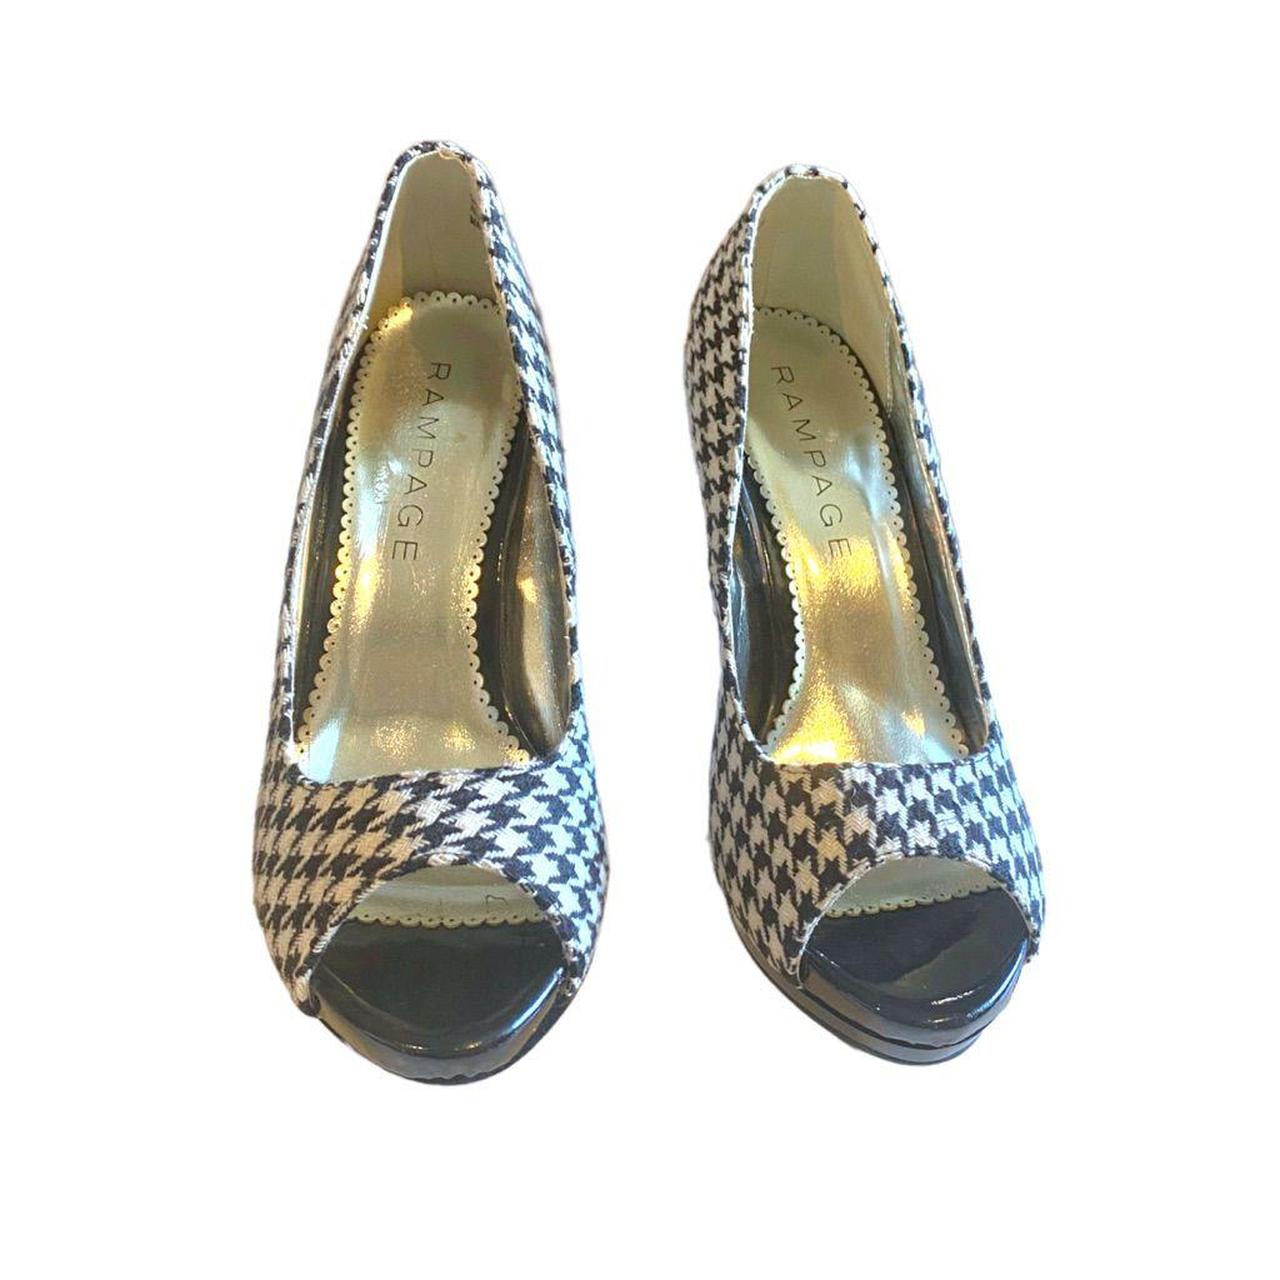 Product Image 2 - Rampage Women’s Houndstooth Heels, 
You